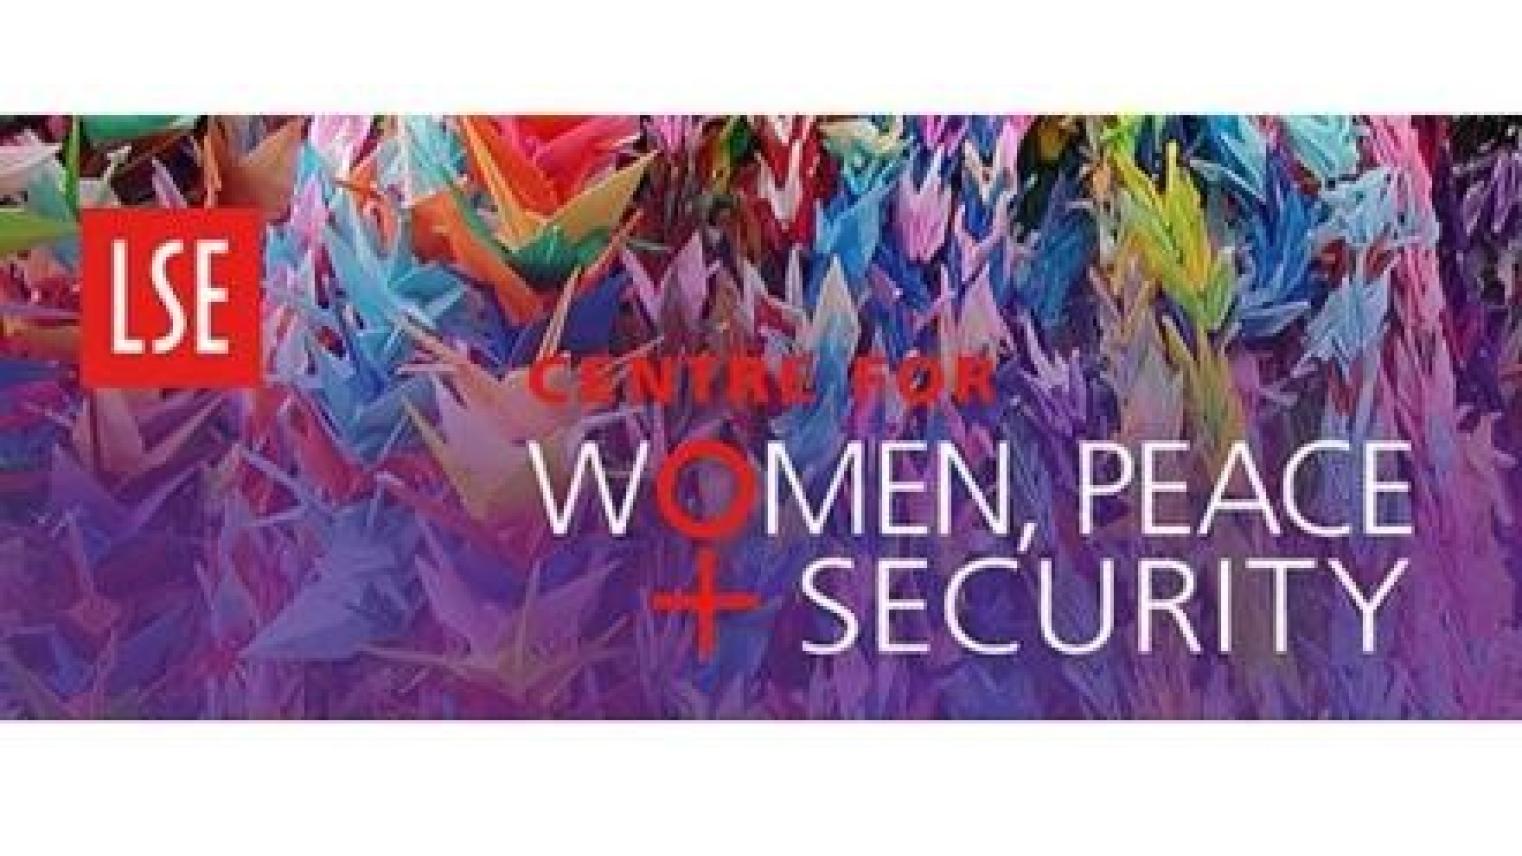 Image: Centre for Women, peace and security